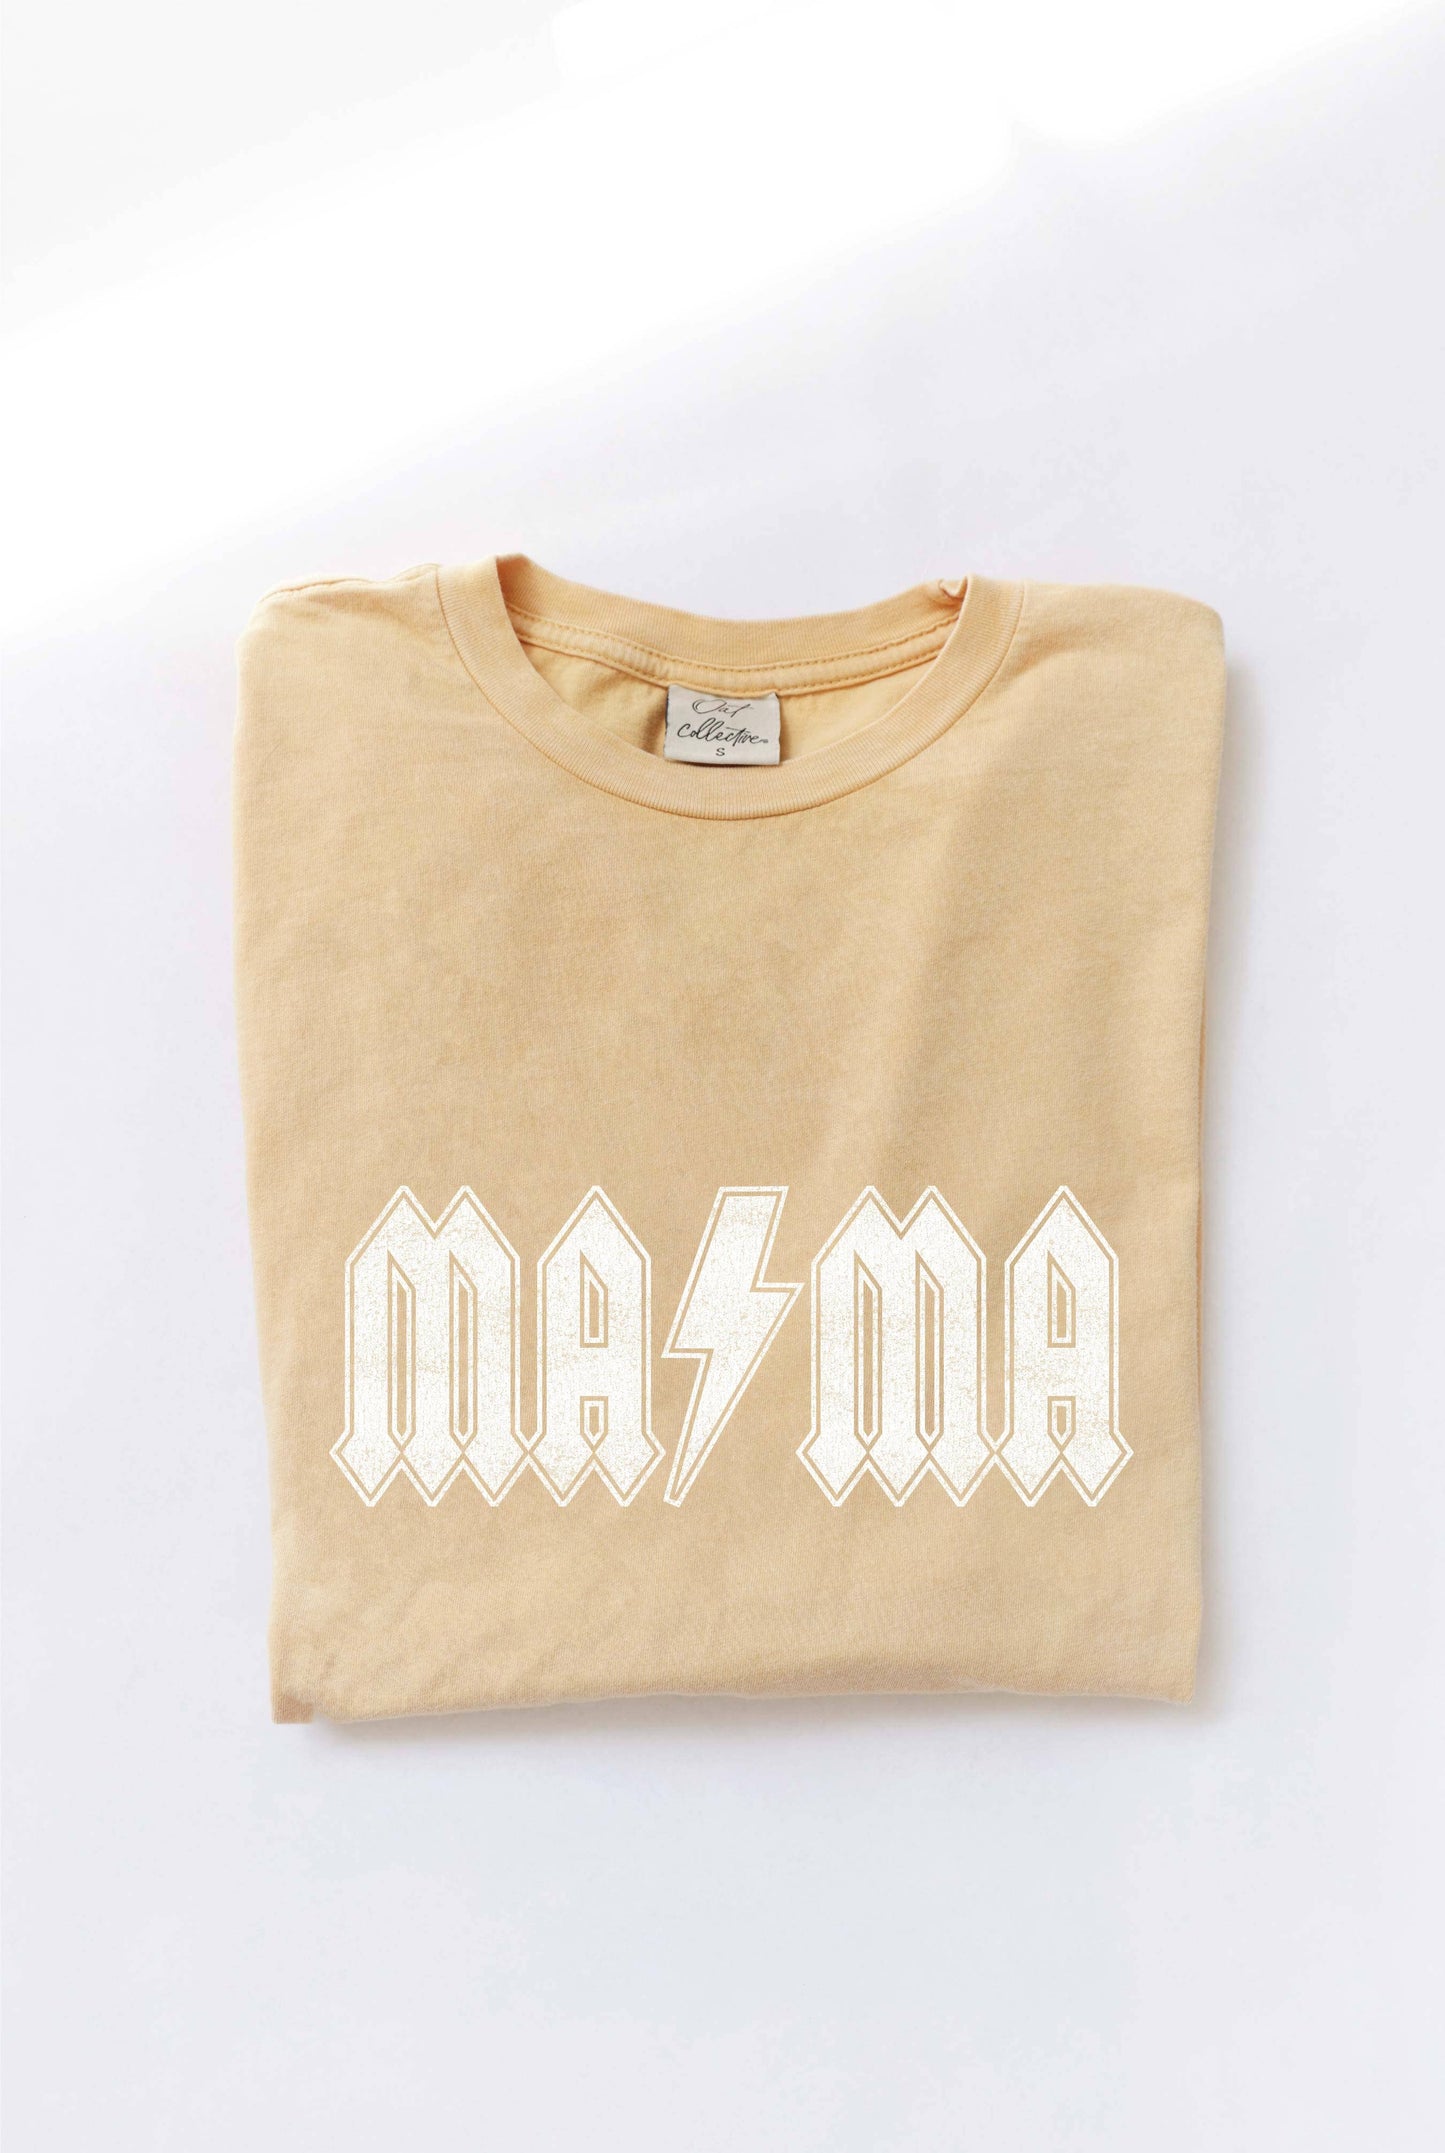 MAMA BOLT  Mineral Washed Graphic Top: TOAST / S